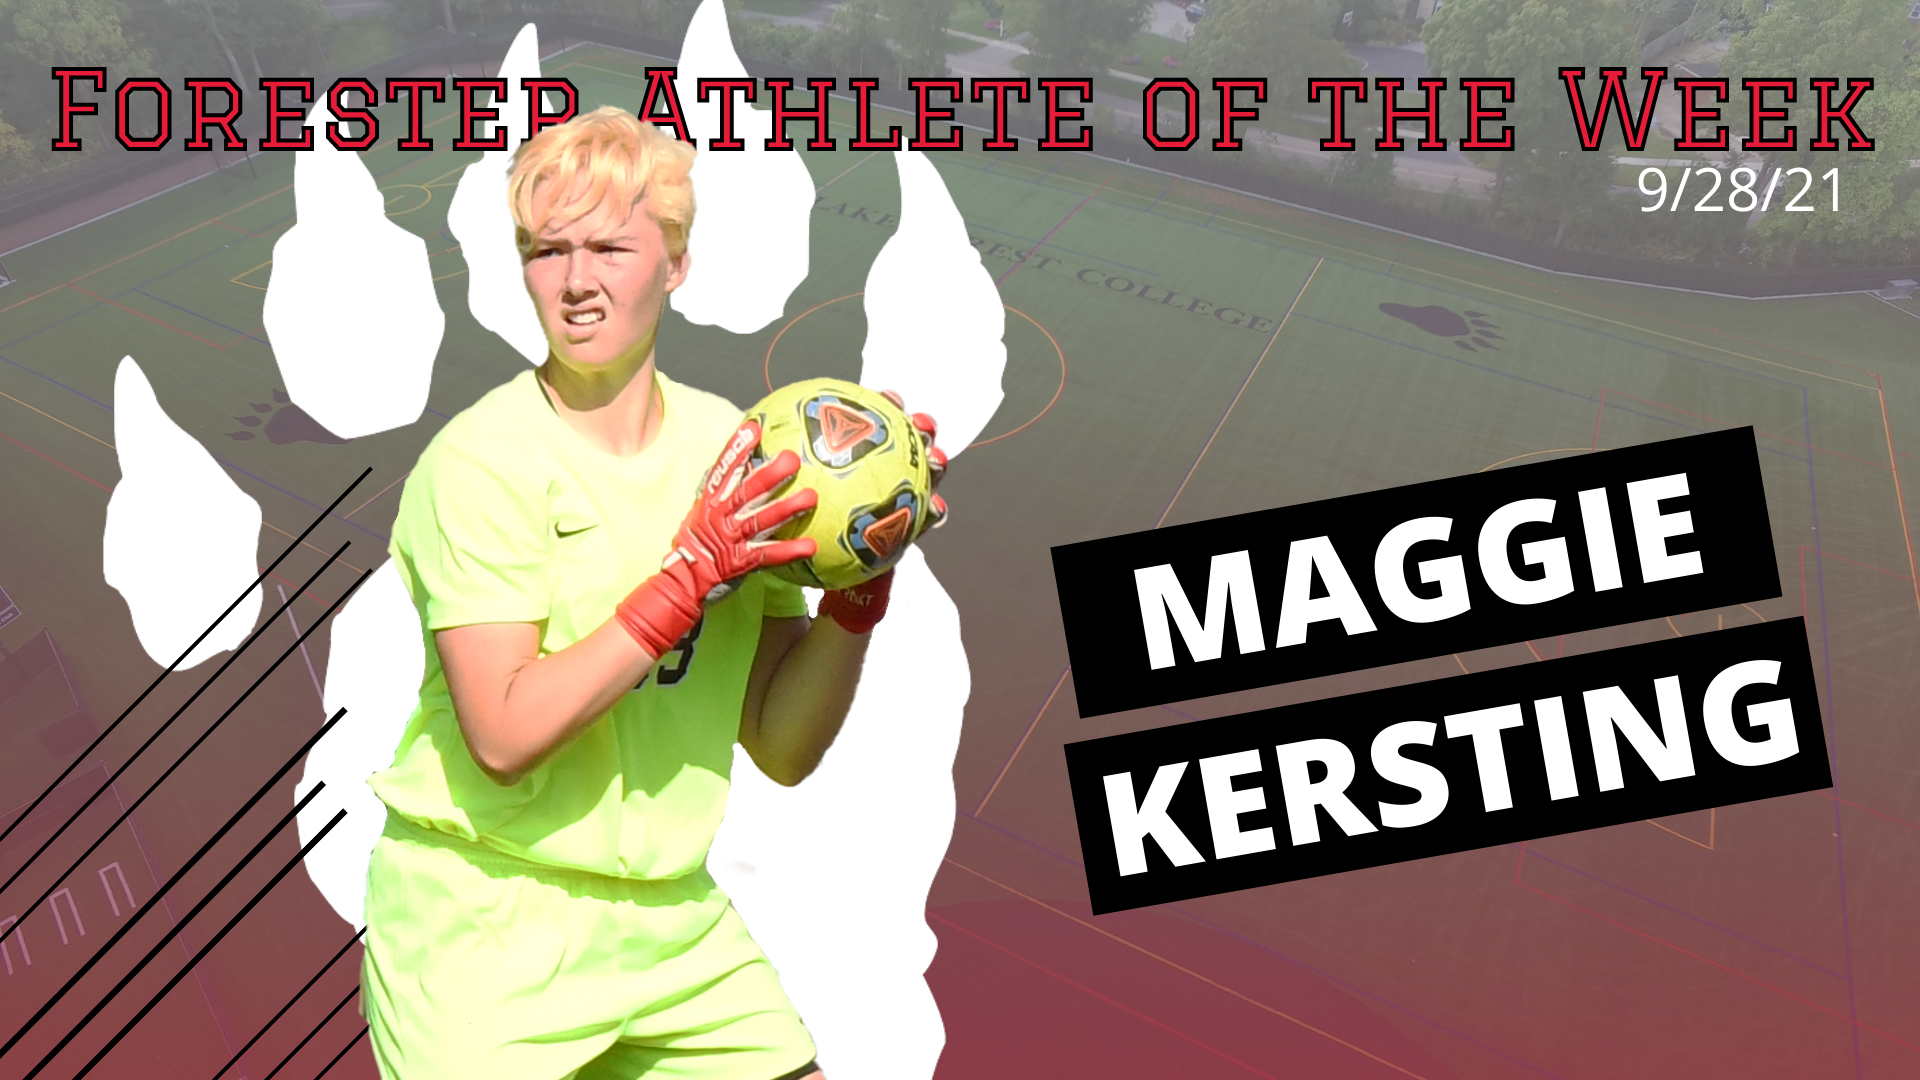 Maggie Kersting Named Women's Forester Athlete of the Week